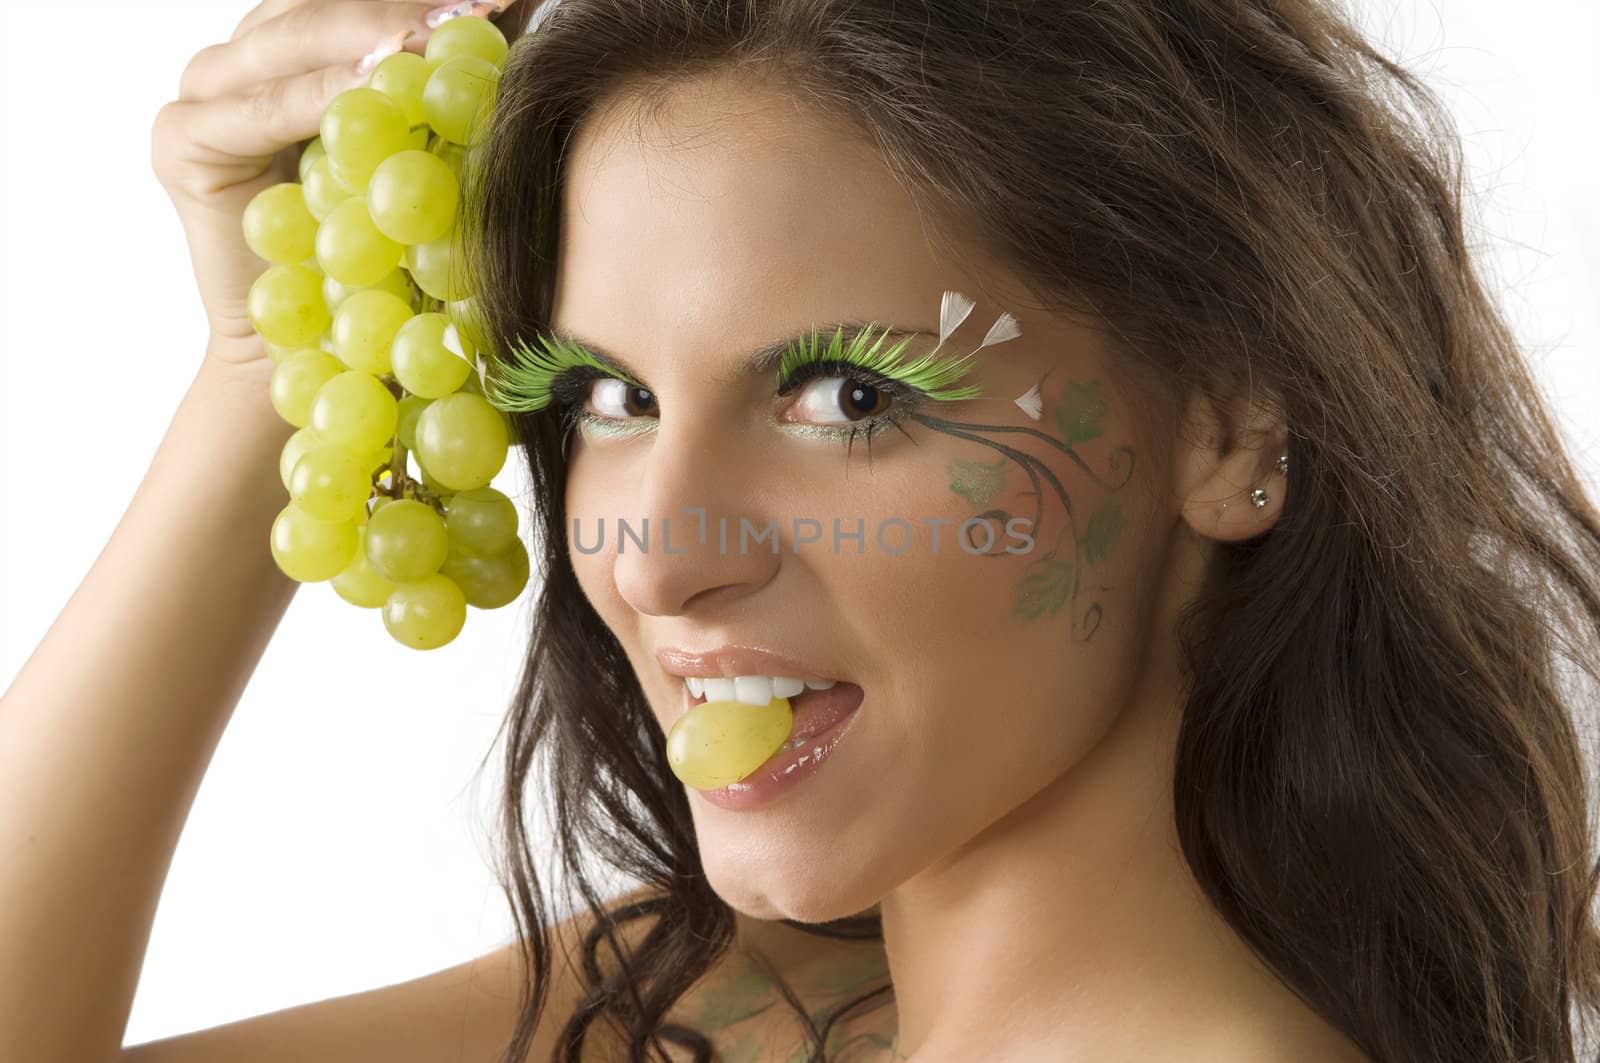 pretty girl with a grape between the teeth and her face painted with green leaf